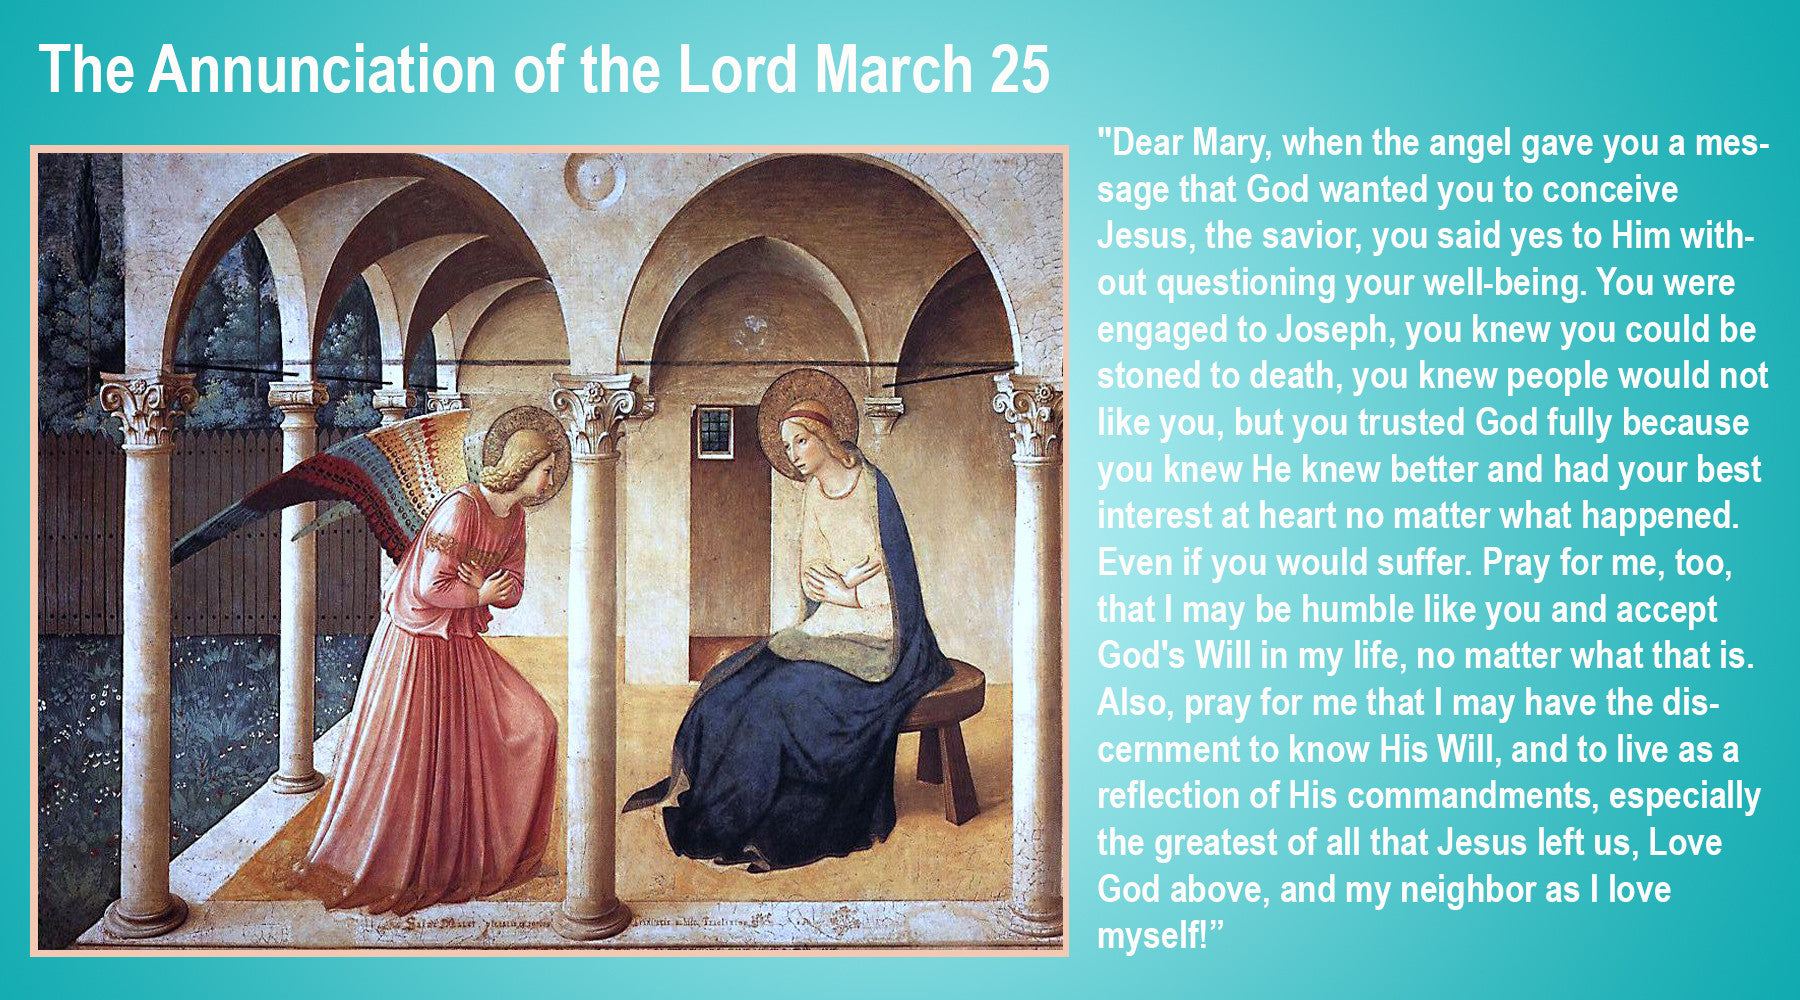 The Annunciation of the Lord March 25